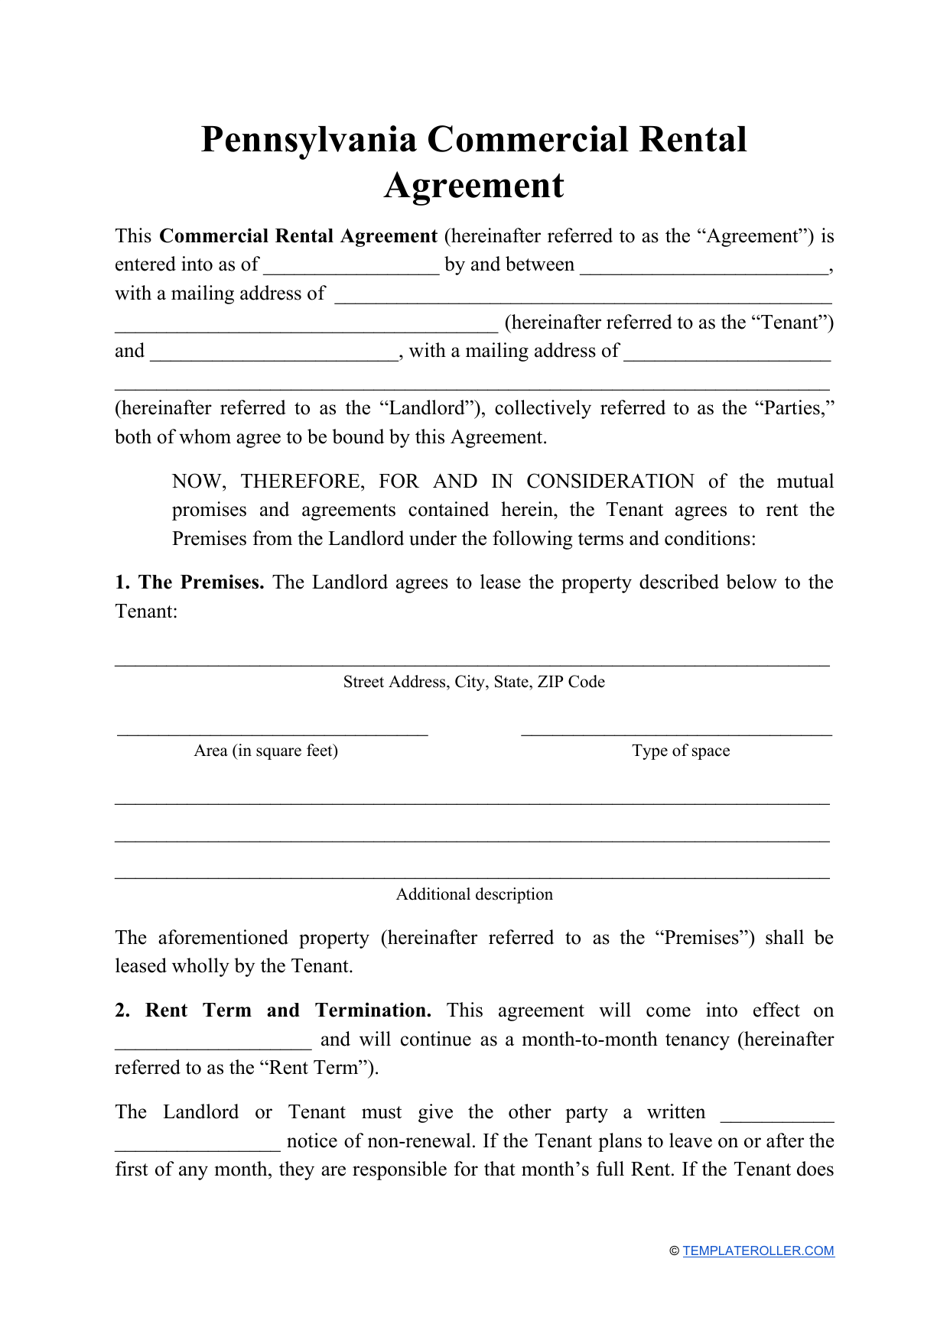 Commercial Rental Agreement Template - Pennsylvania, Page 1